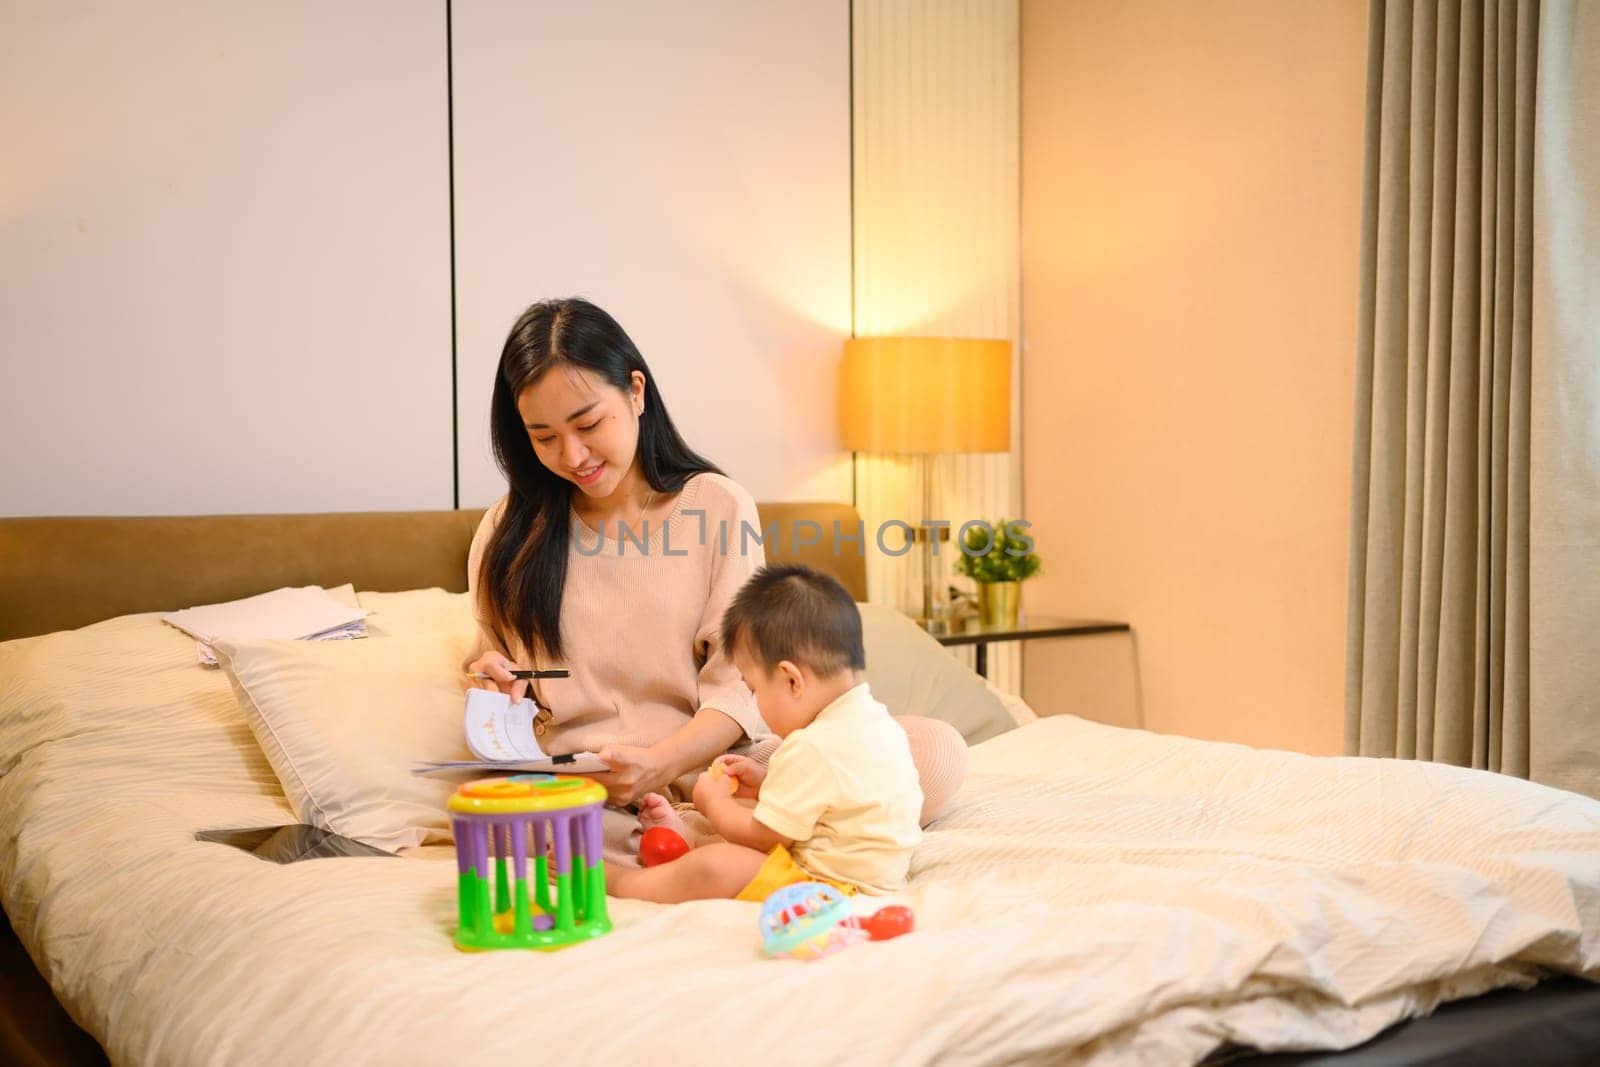 A cute baby boy playing toys in comfortable bed near working mother. Childcare and working mom concept.